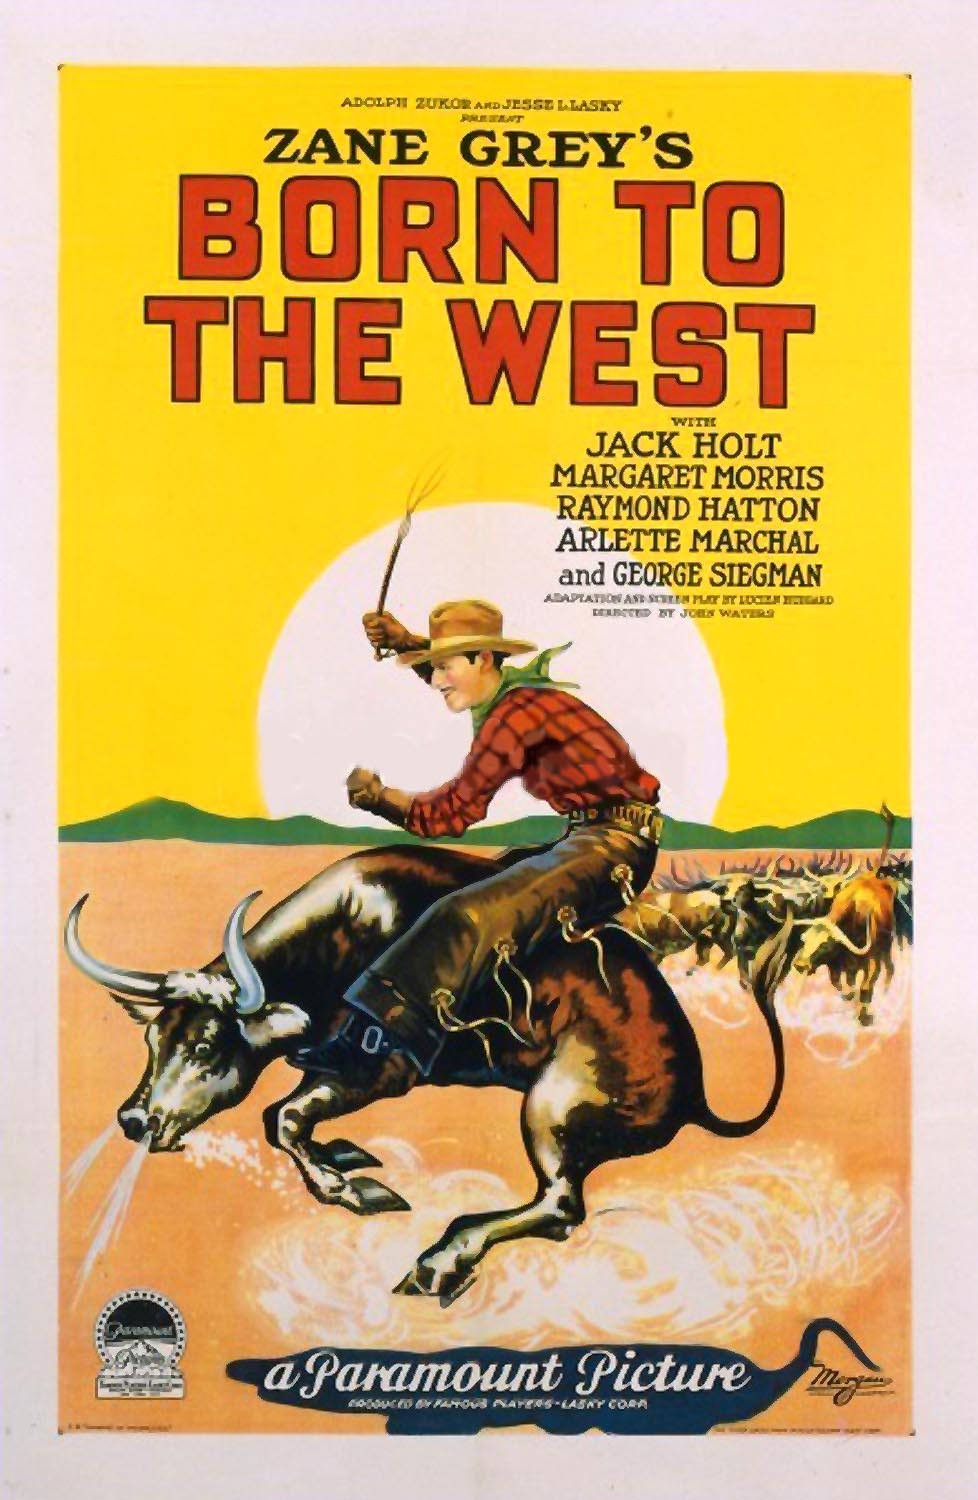 BORN TO THE WEST